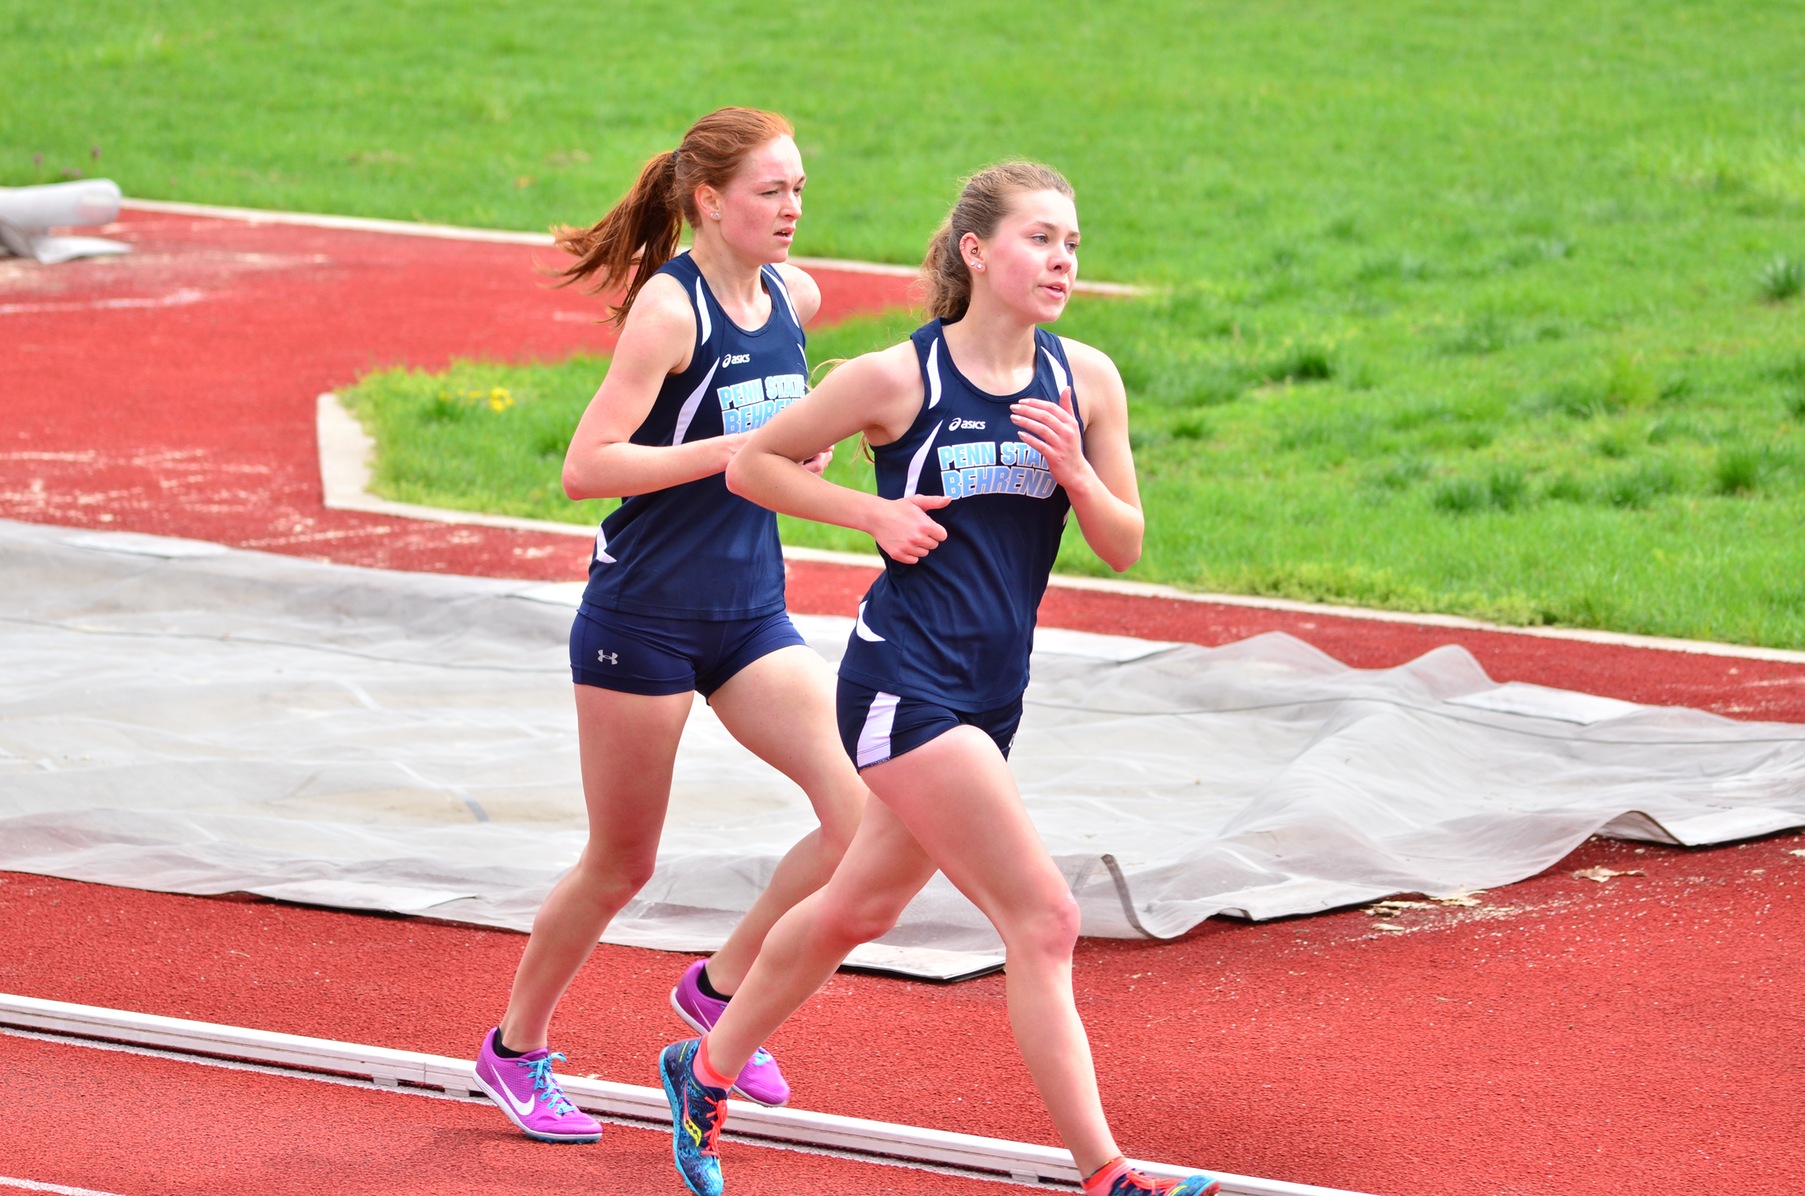 Women’s Track & Field Takes 13th at Westminster